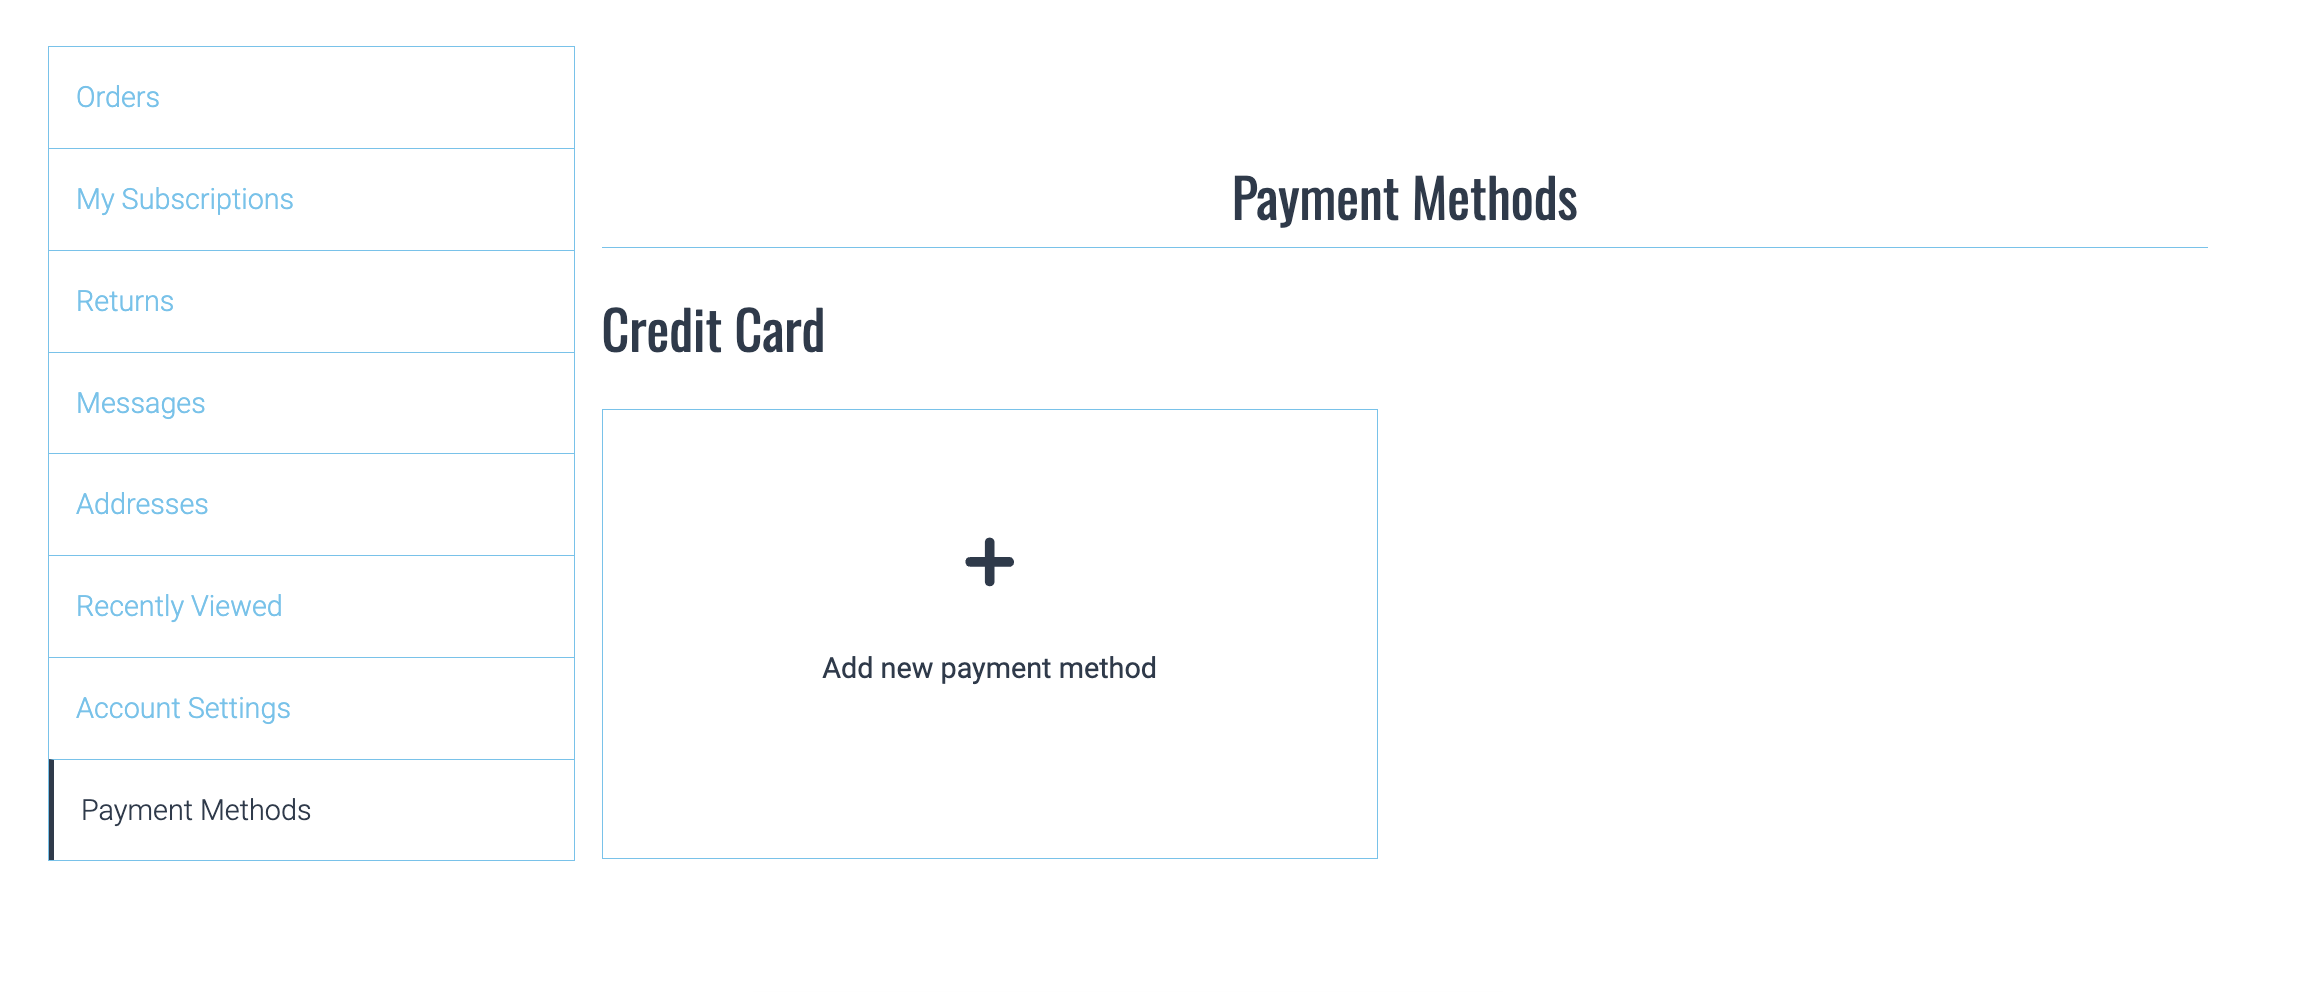 Add a new payment method to your BAWLS account. Login to your account and click Payment Methods in the left column.